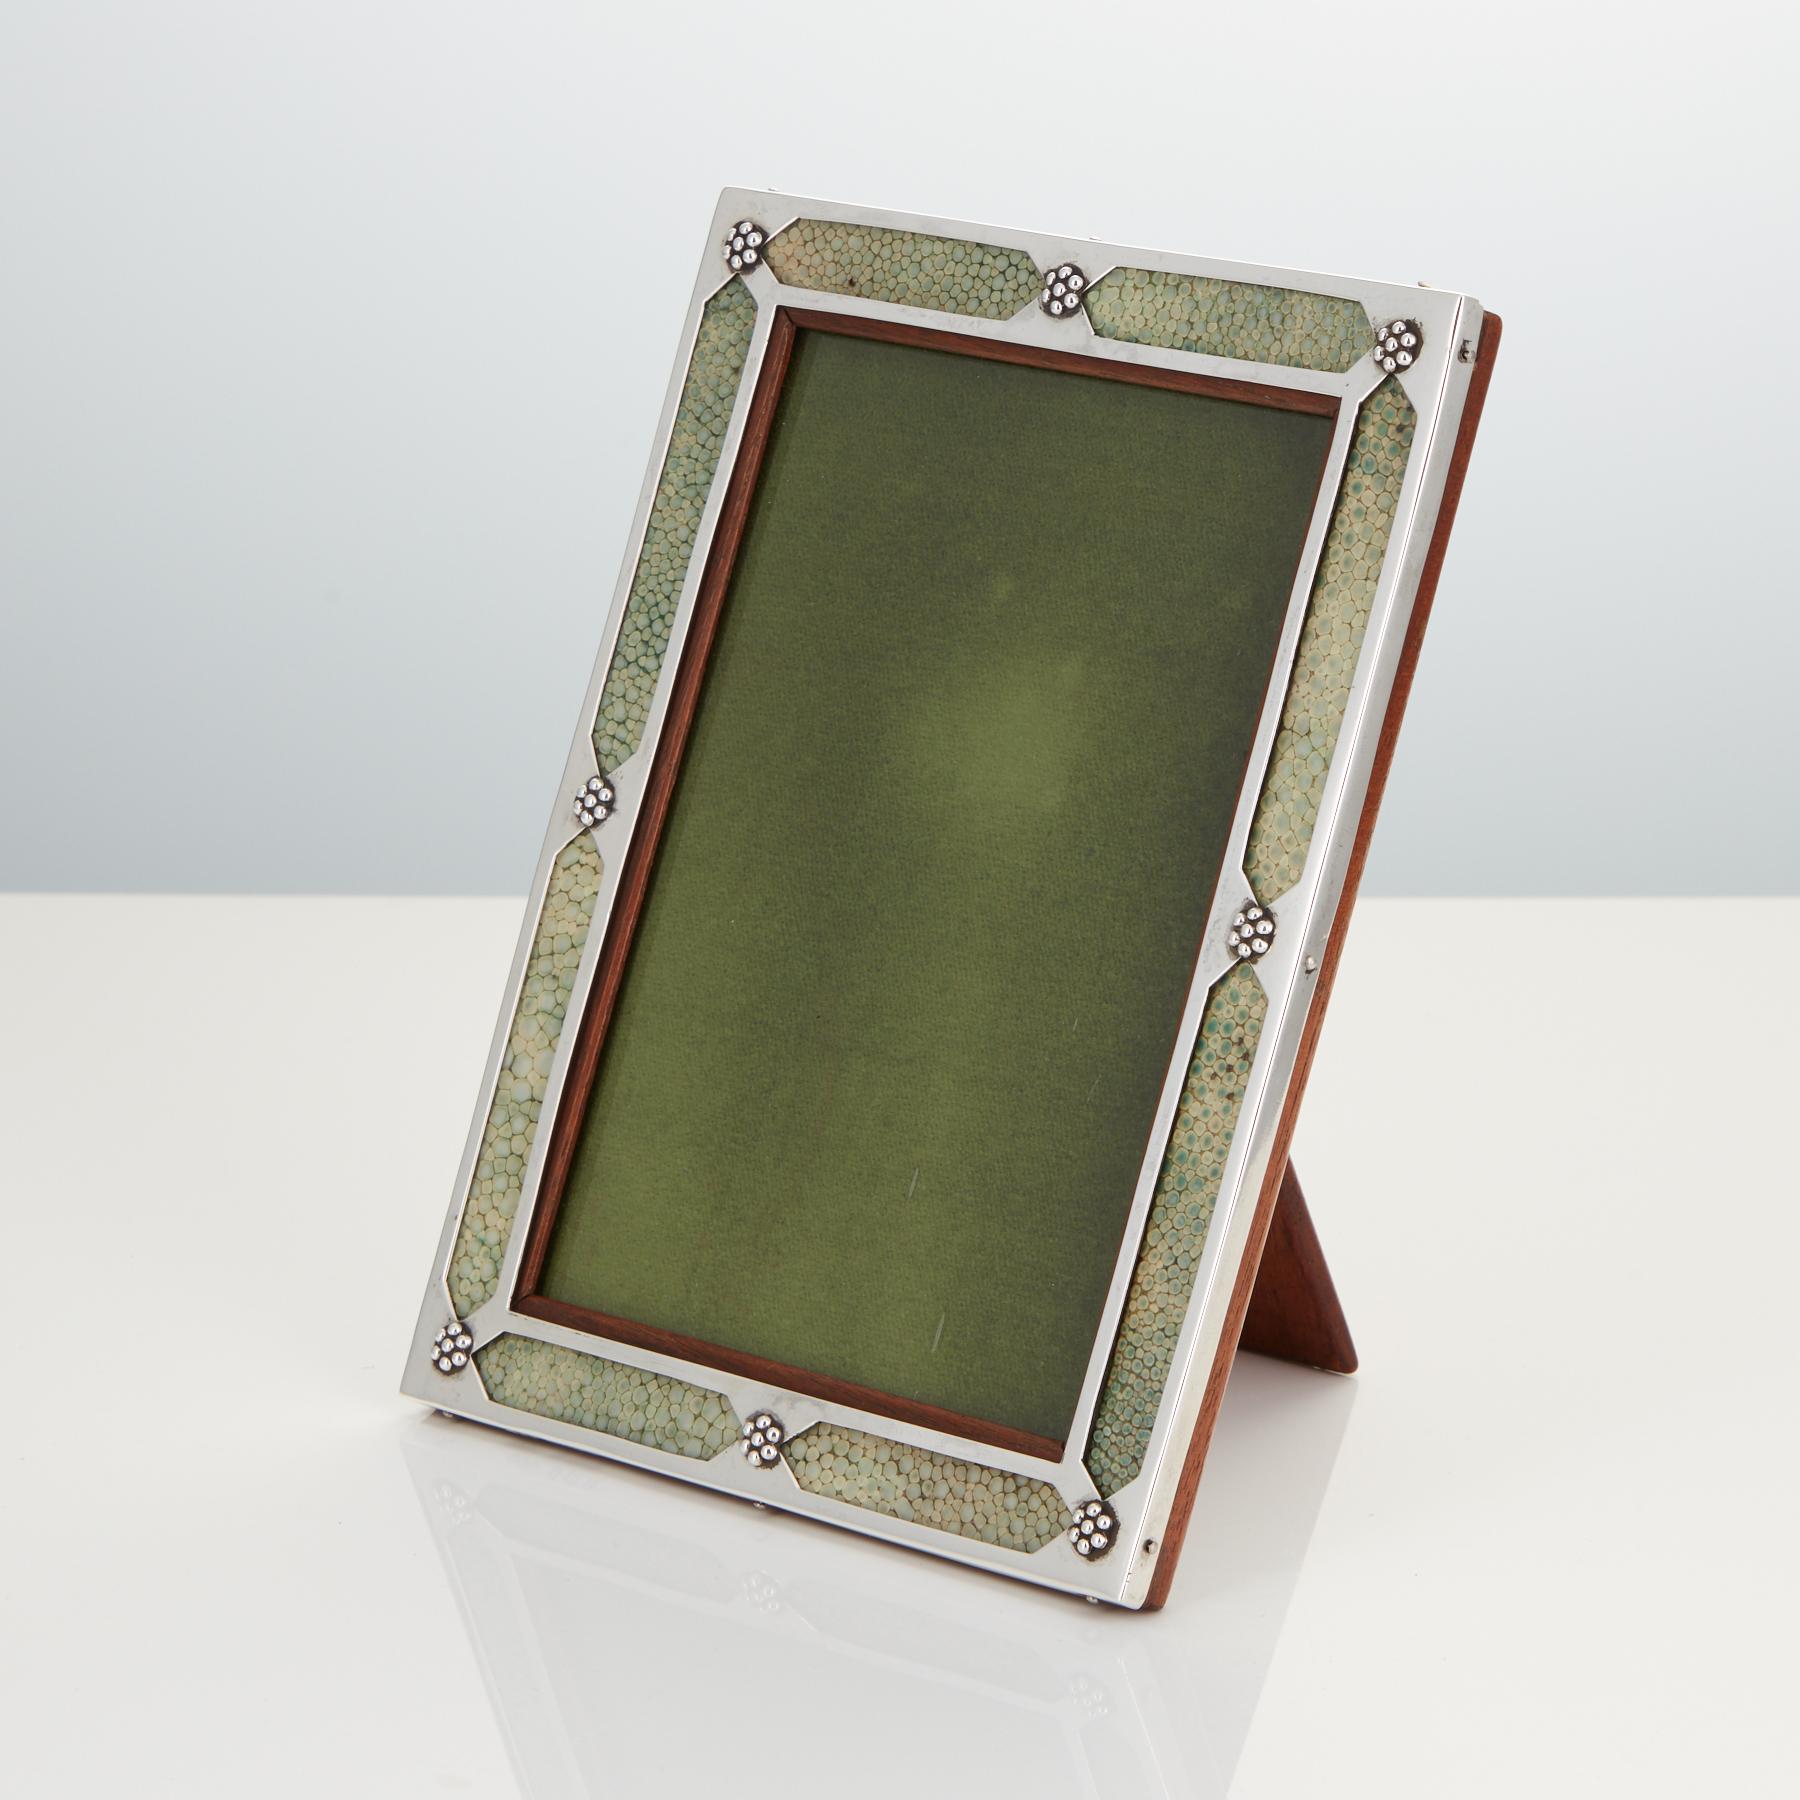 Rare 20th century Art Nouveau sterling silver and shagreen photograph frame dated Birmingham, 1908.
The maker is Liberty & Co.
This piece is by a great original condition including the back. It has elements of Arts & Crafts in the silver